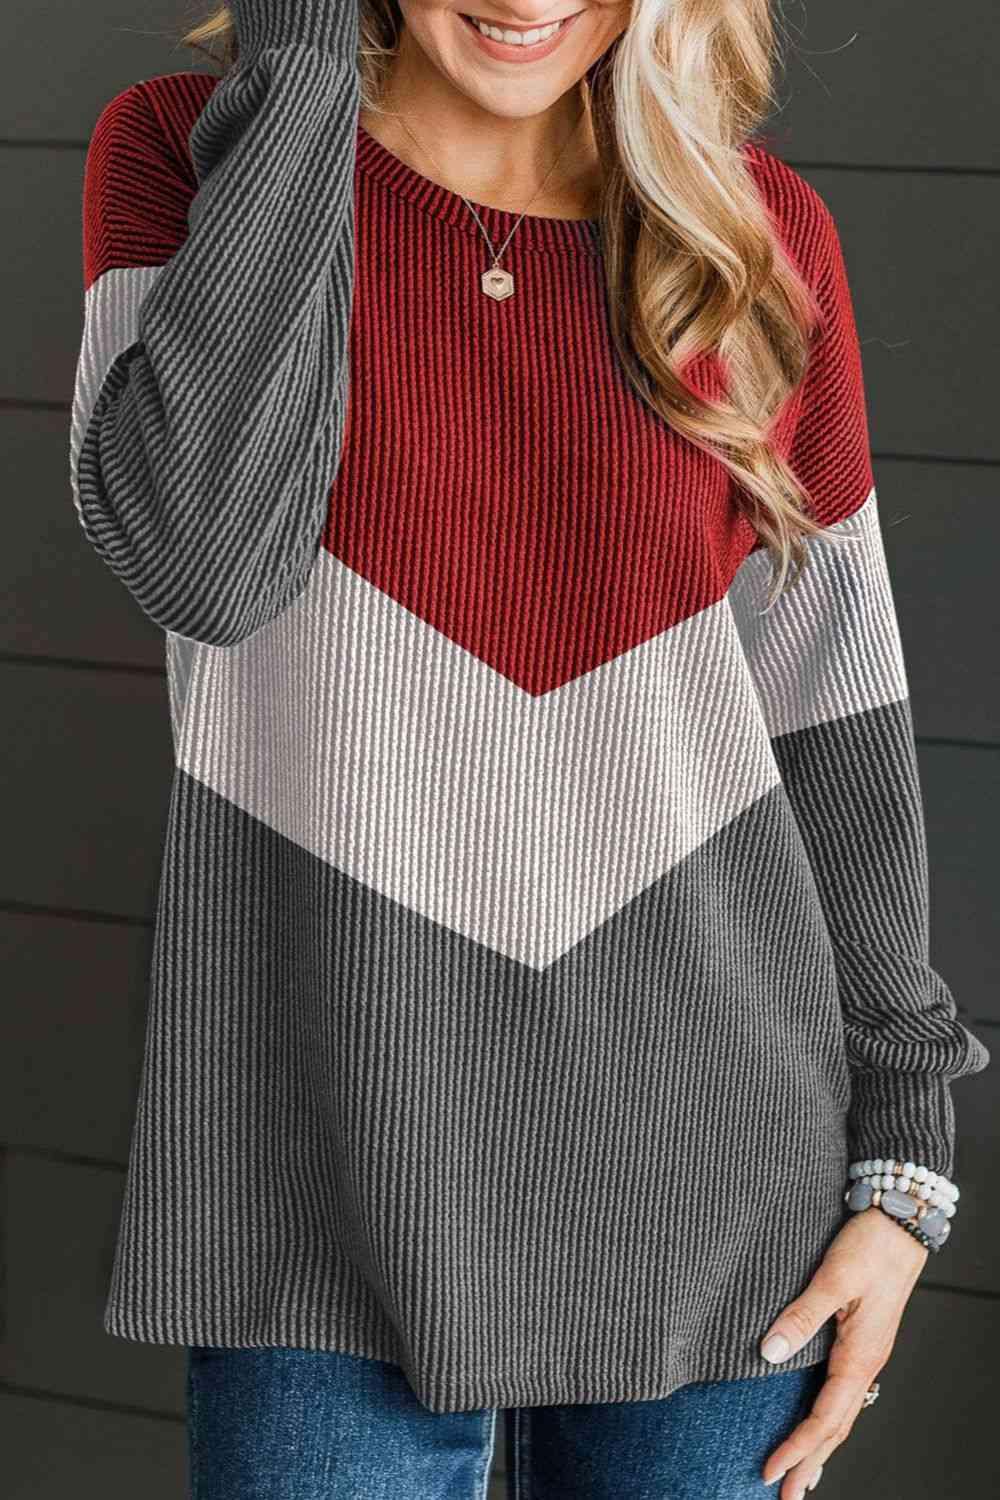 a woman wearing a red and grey sweater